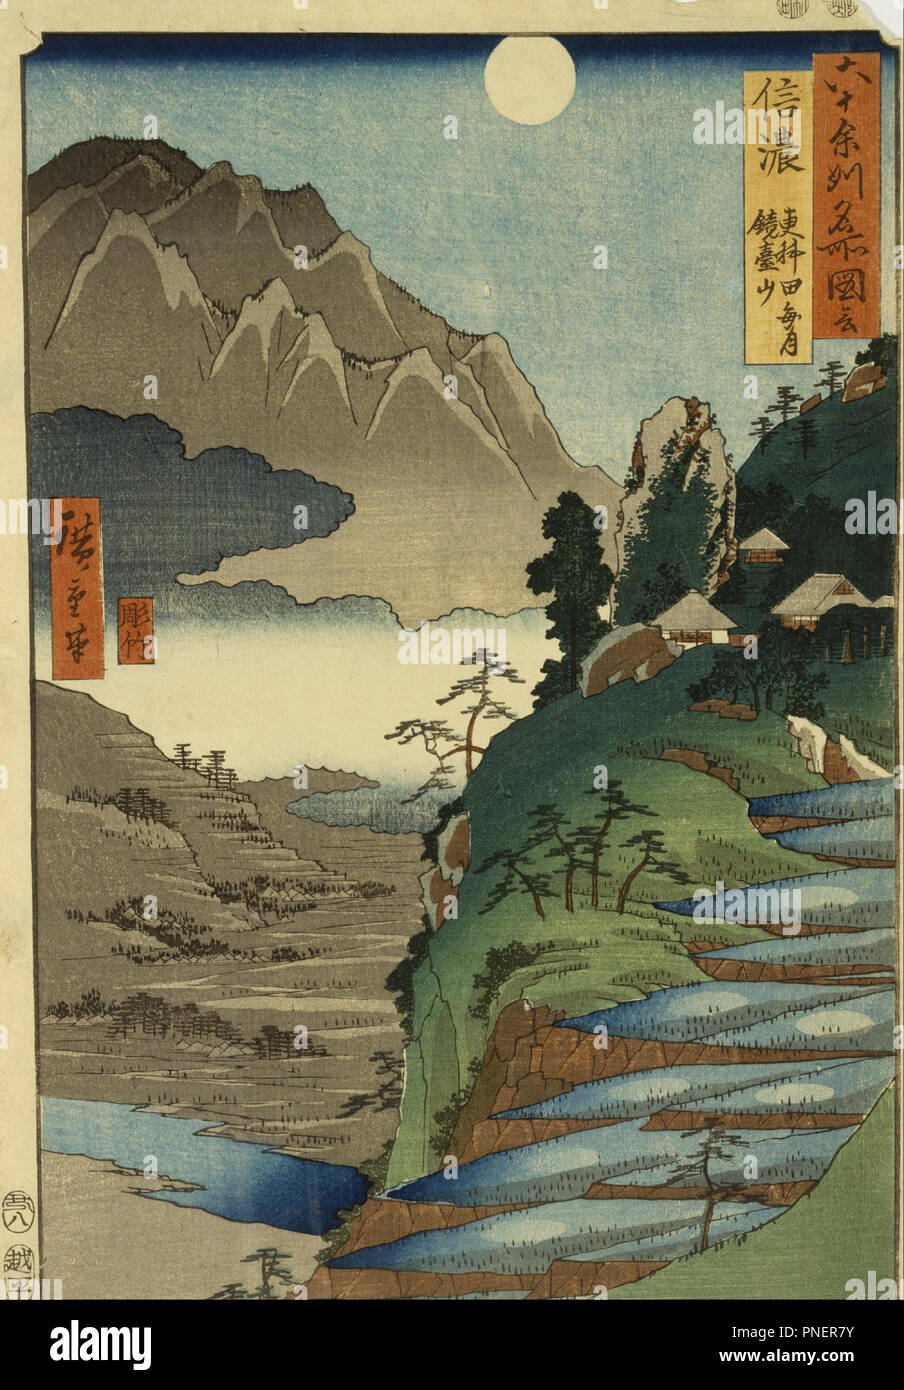 Mt. Kyodai and the Moon Reflected in the Rice Fields at Sarashina in Shinano Province, No. 25. Date/Period: 1853/1858. Woodcut. Width: 24.1 cm. Height: 34.8 cm (sheet). Author: Ando Hiroshige. Stock Photo